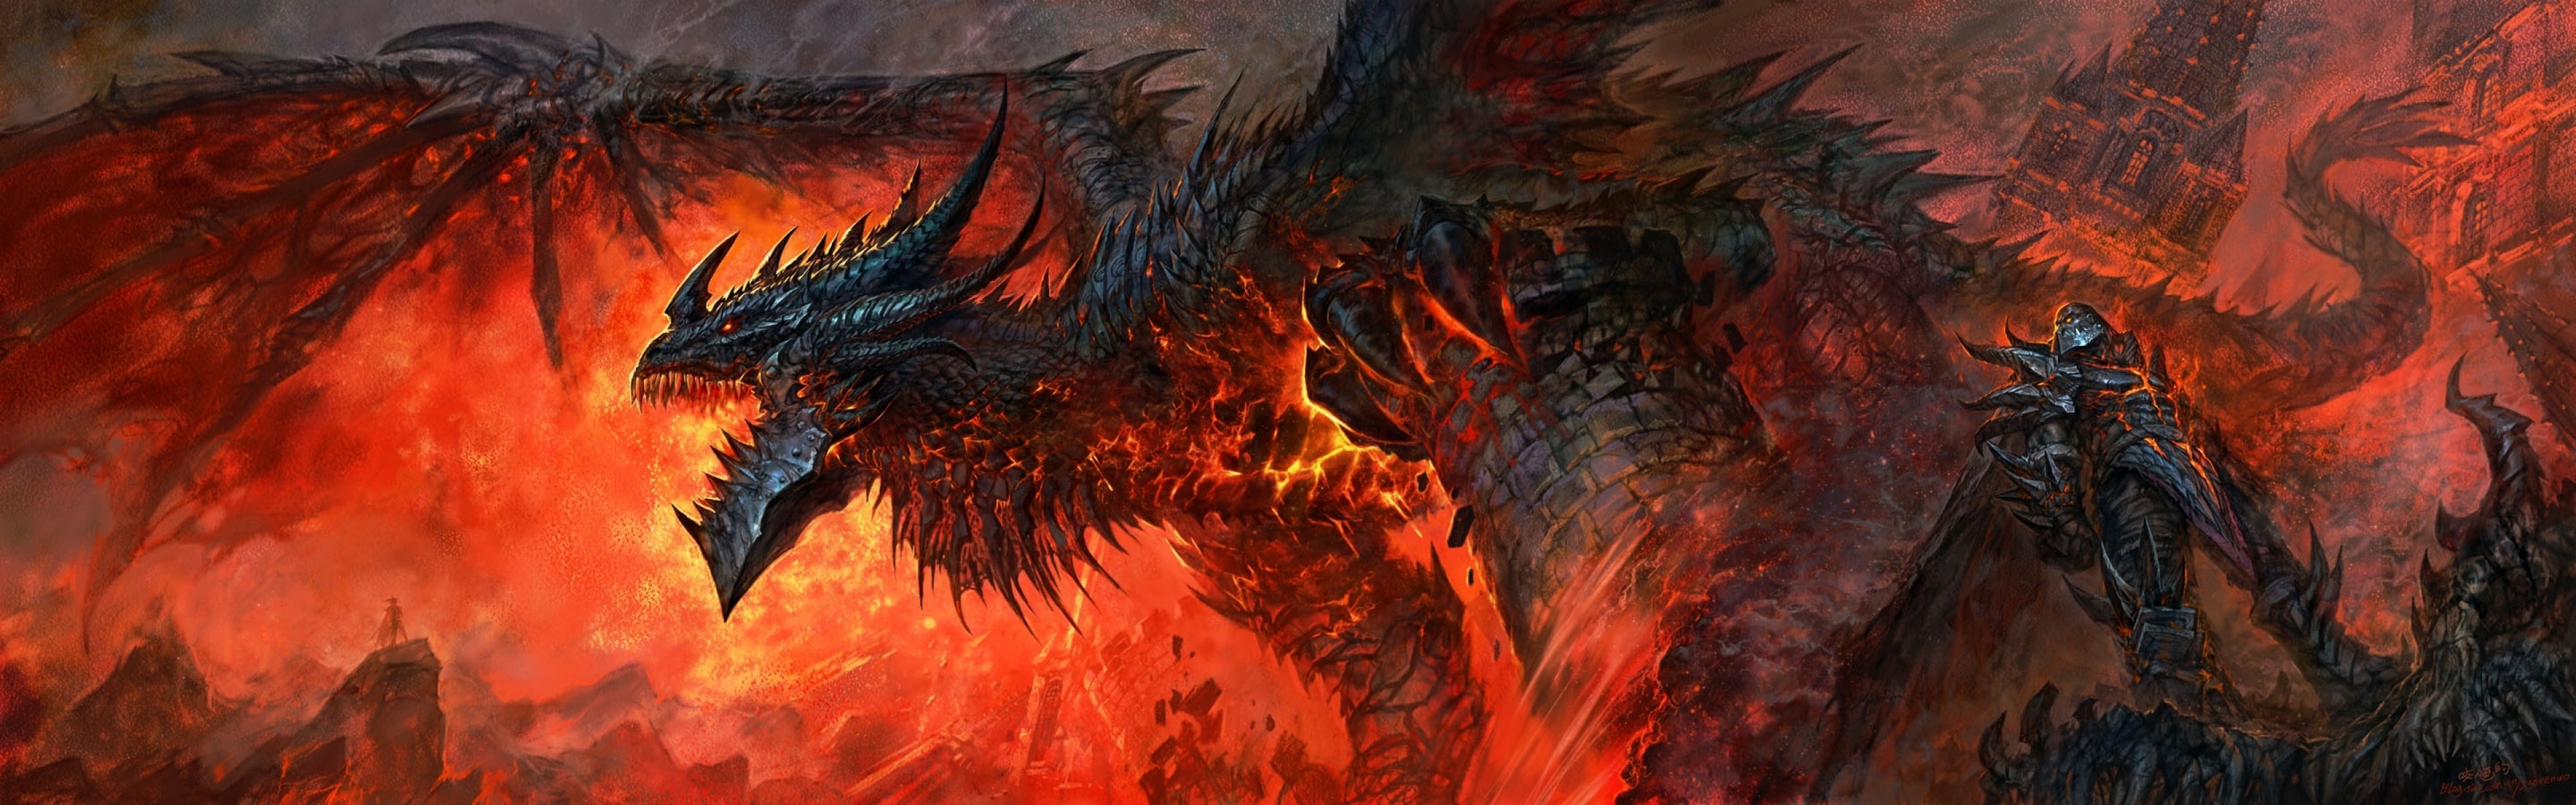 3840x1200 WOW: Deathwing HD pics WOW: Deathwing Wallpapers hd